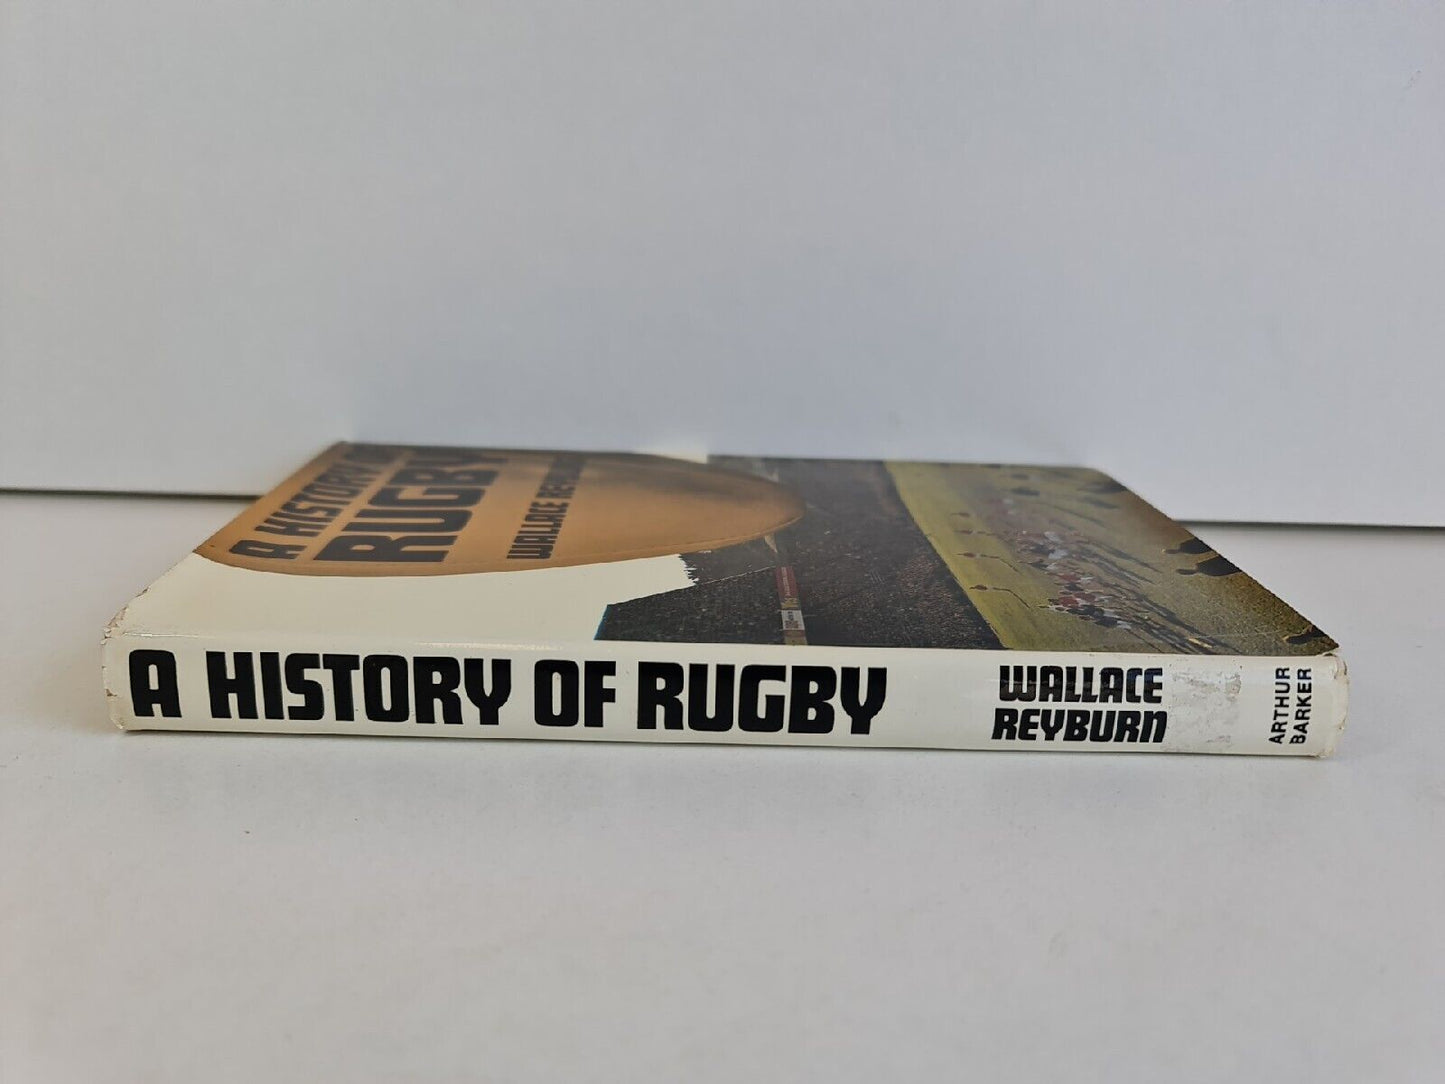 History of Rugby by Wallace Reyburn (1971)